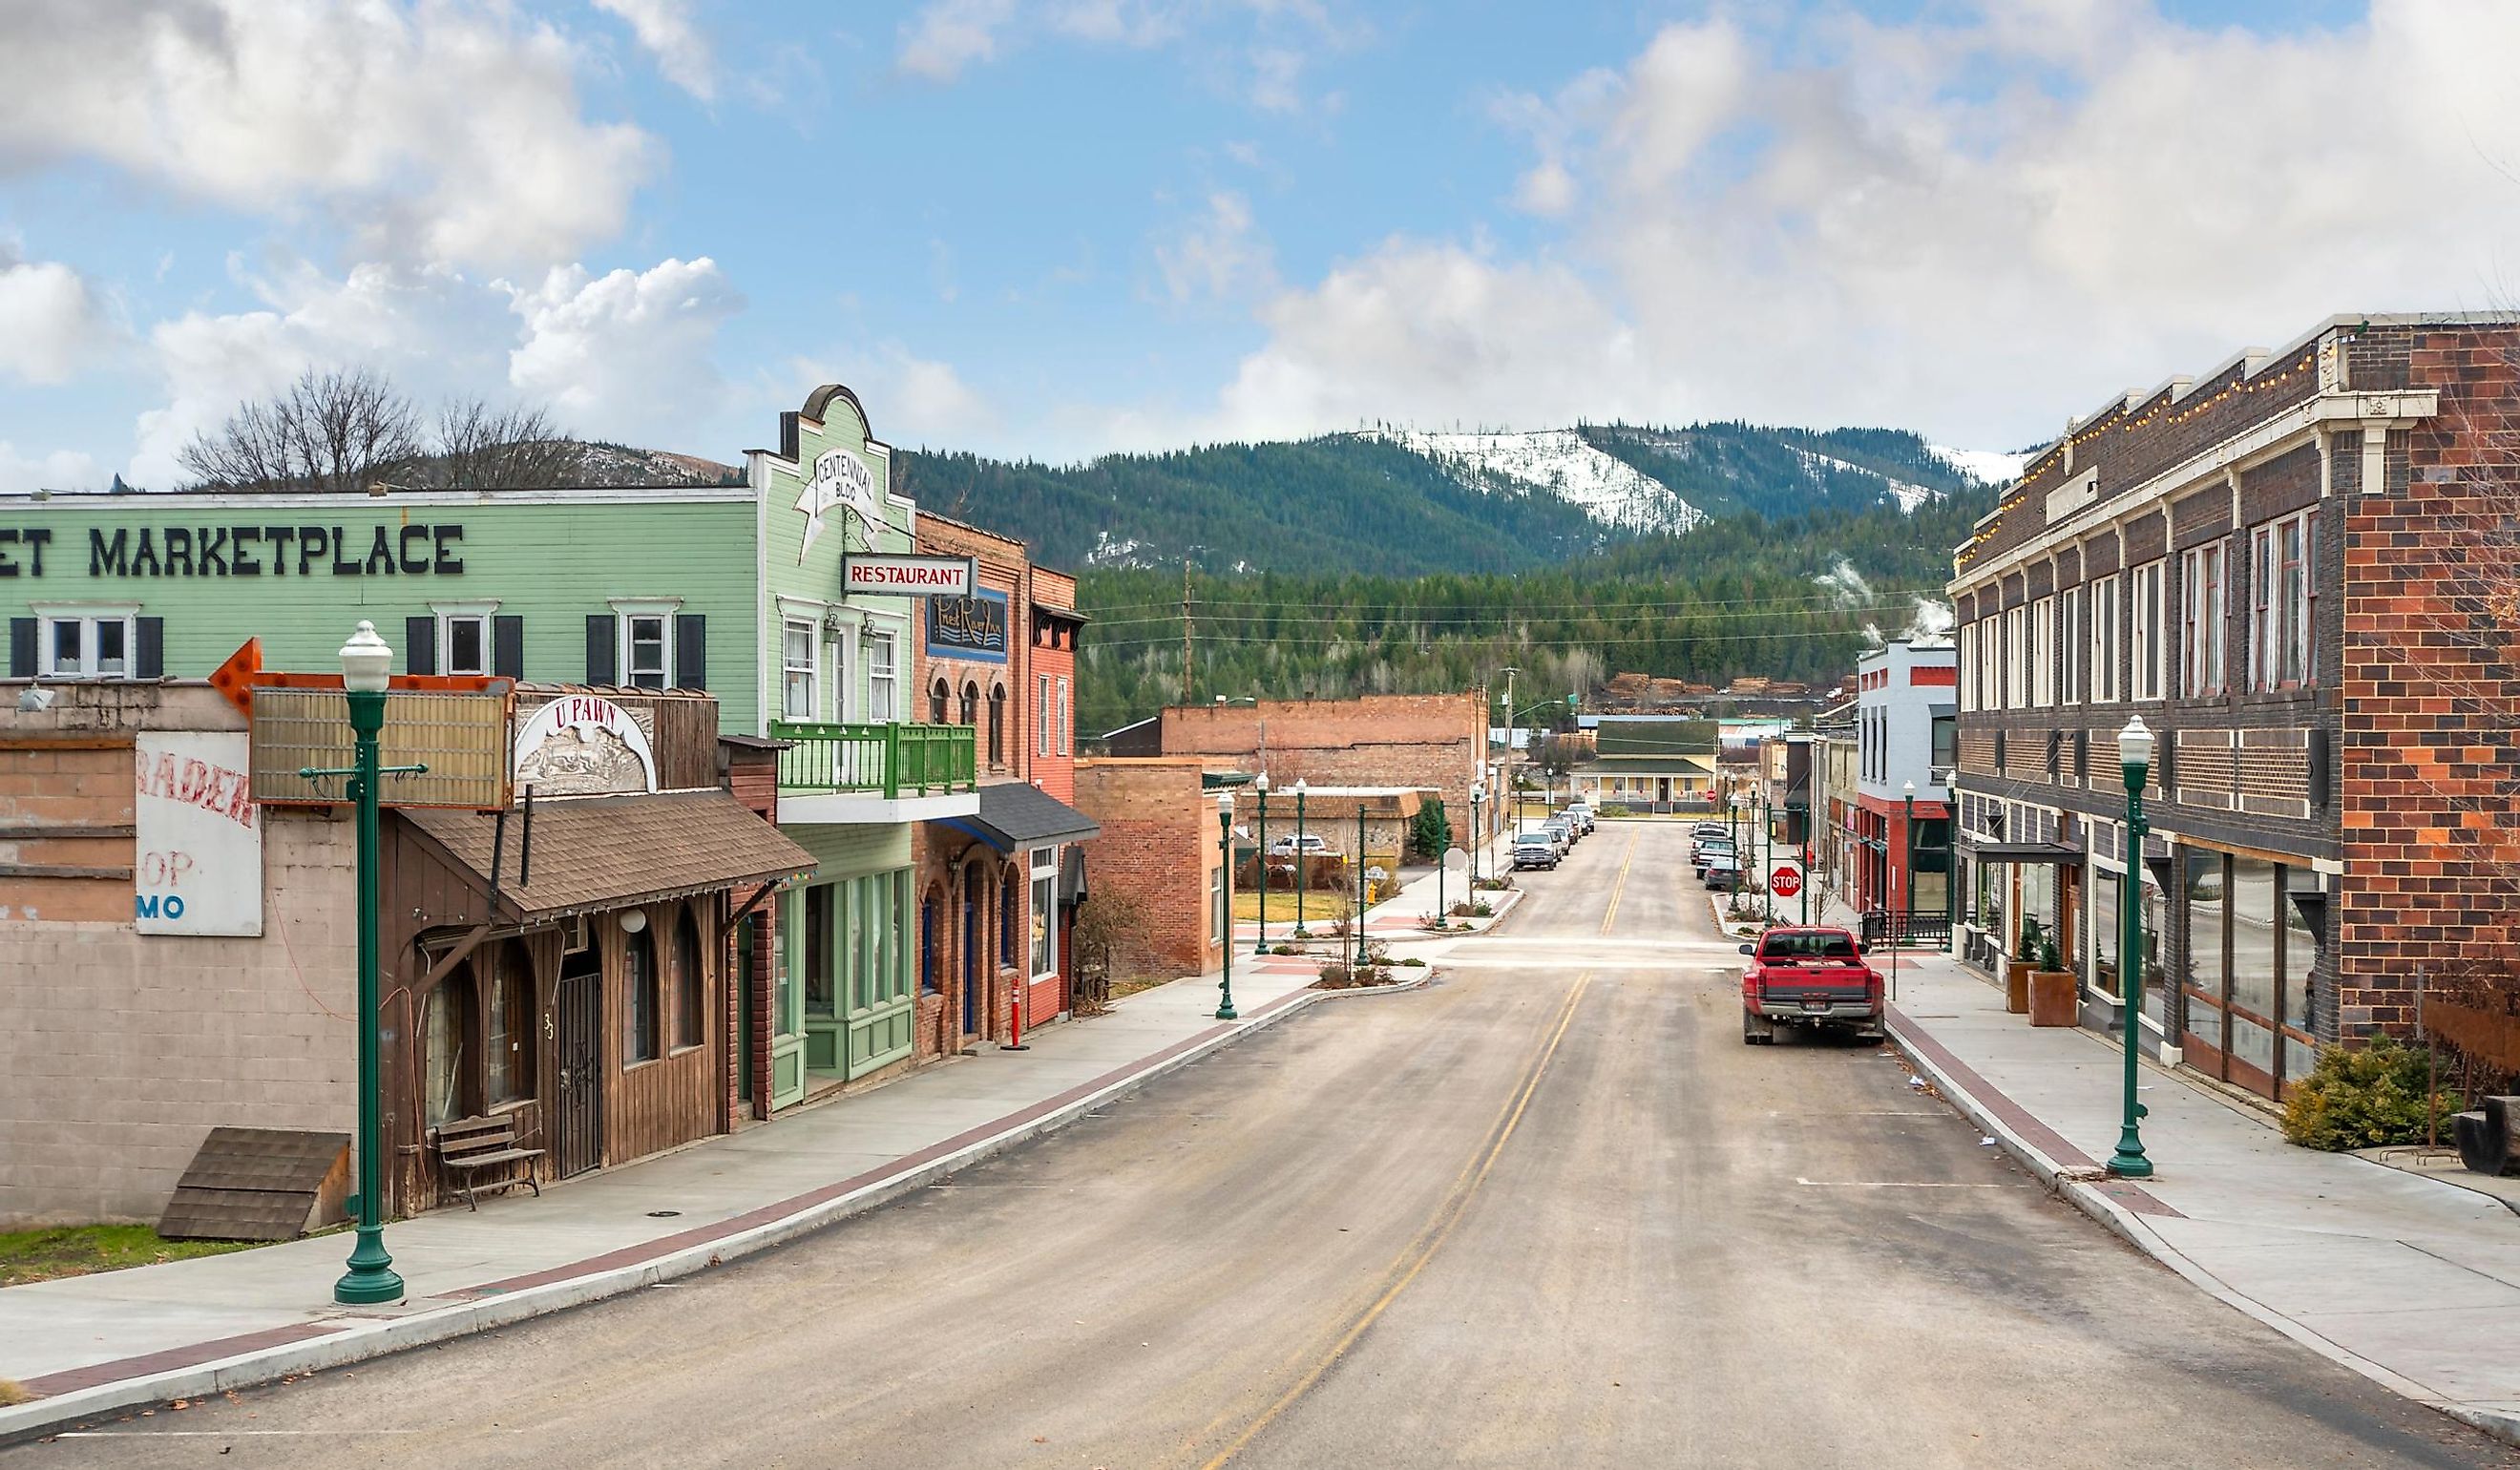  The main street of historic Priest River, Idaho. Editorial credit: Kirk Fisher / Shutterstock.com